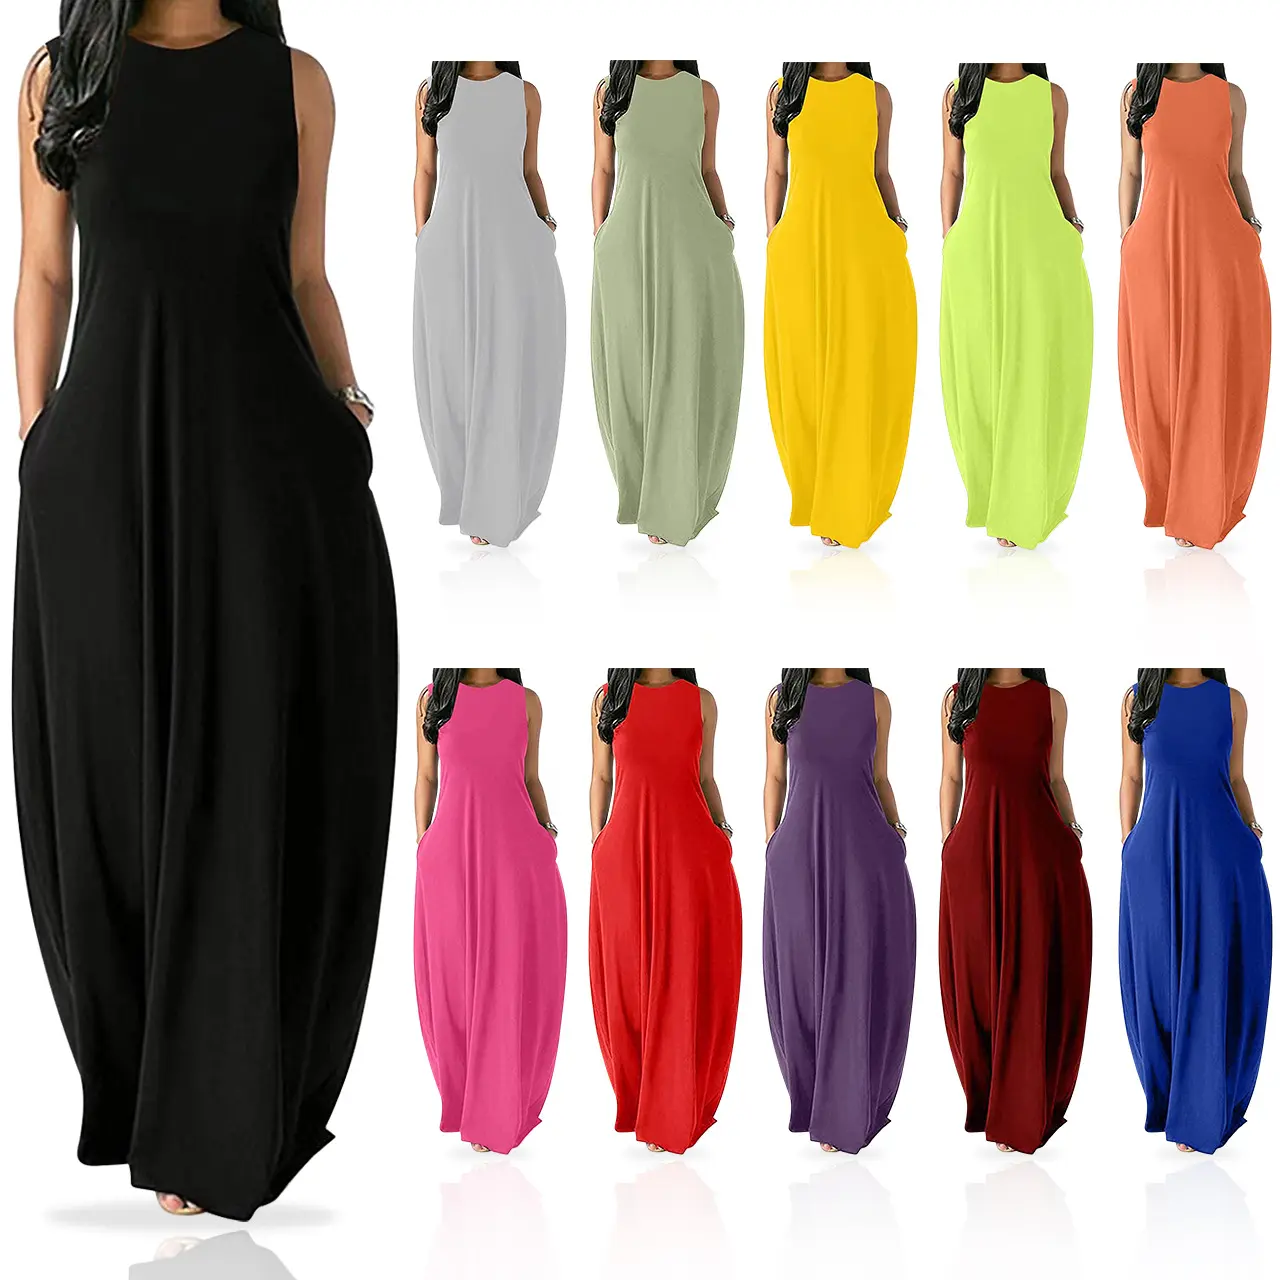 Loose Sleeveless Vest Solid Color O Neck Maxi Long Casual Dresses Women